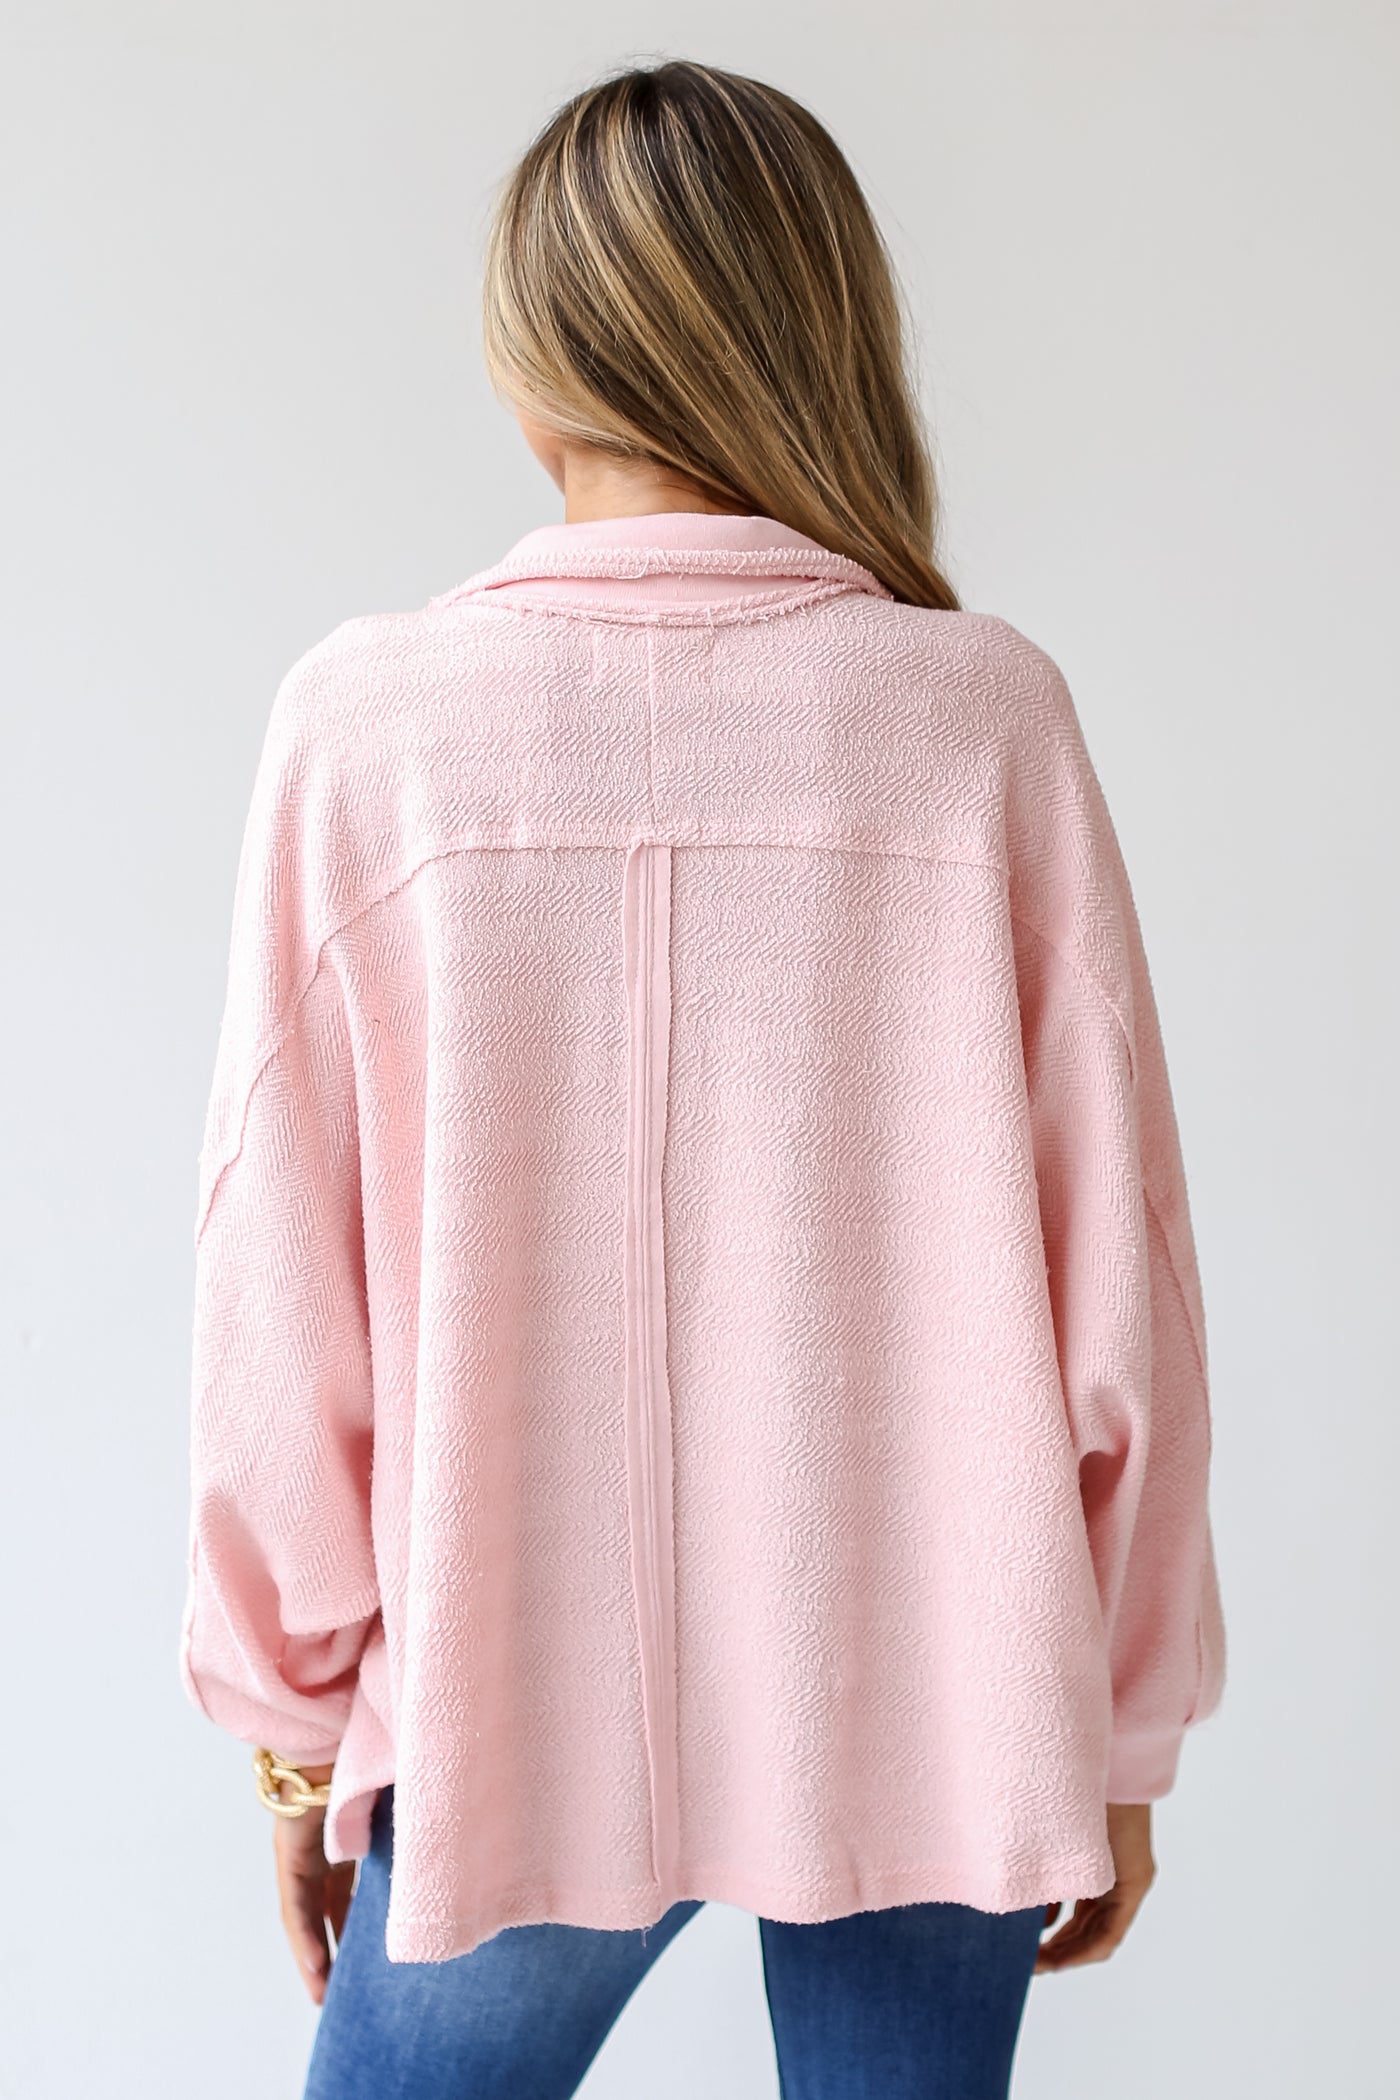 blush Oversized Collared Top back view